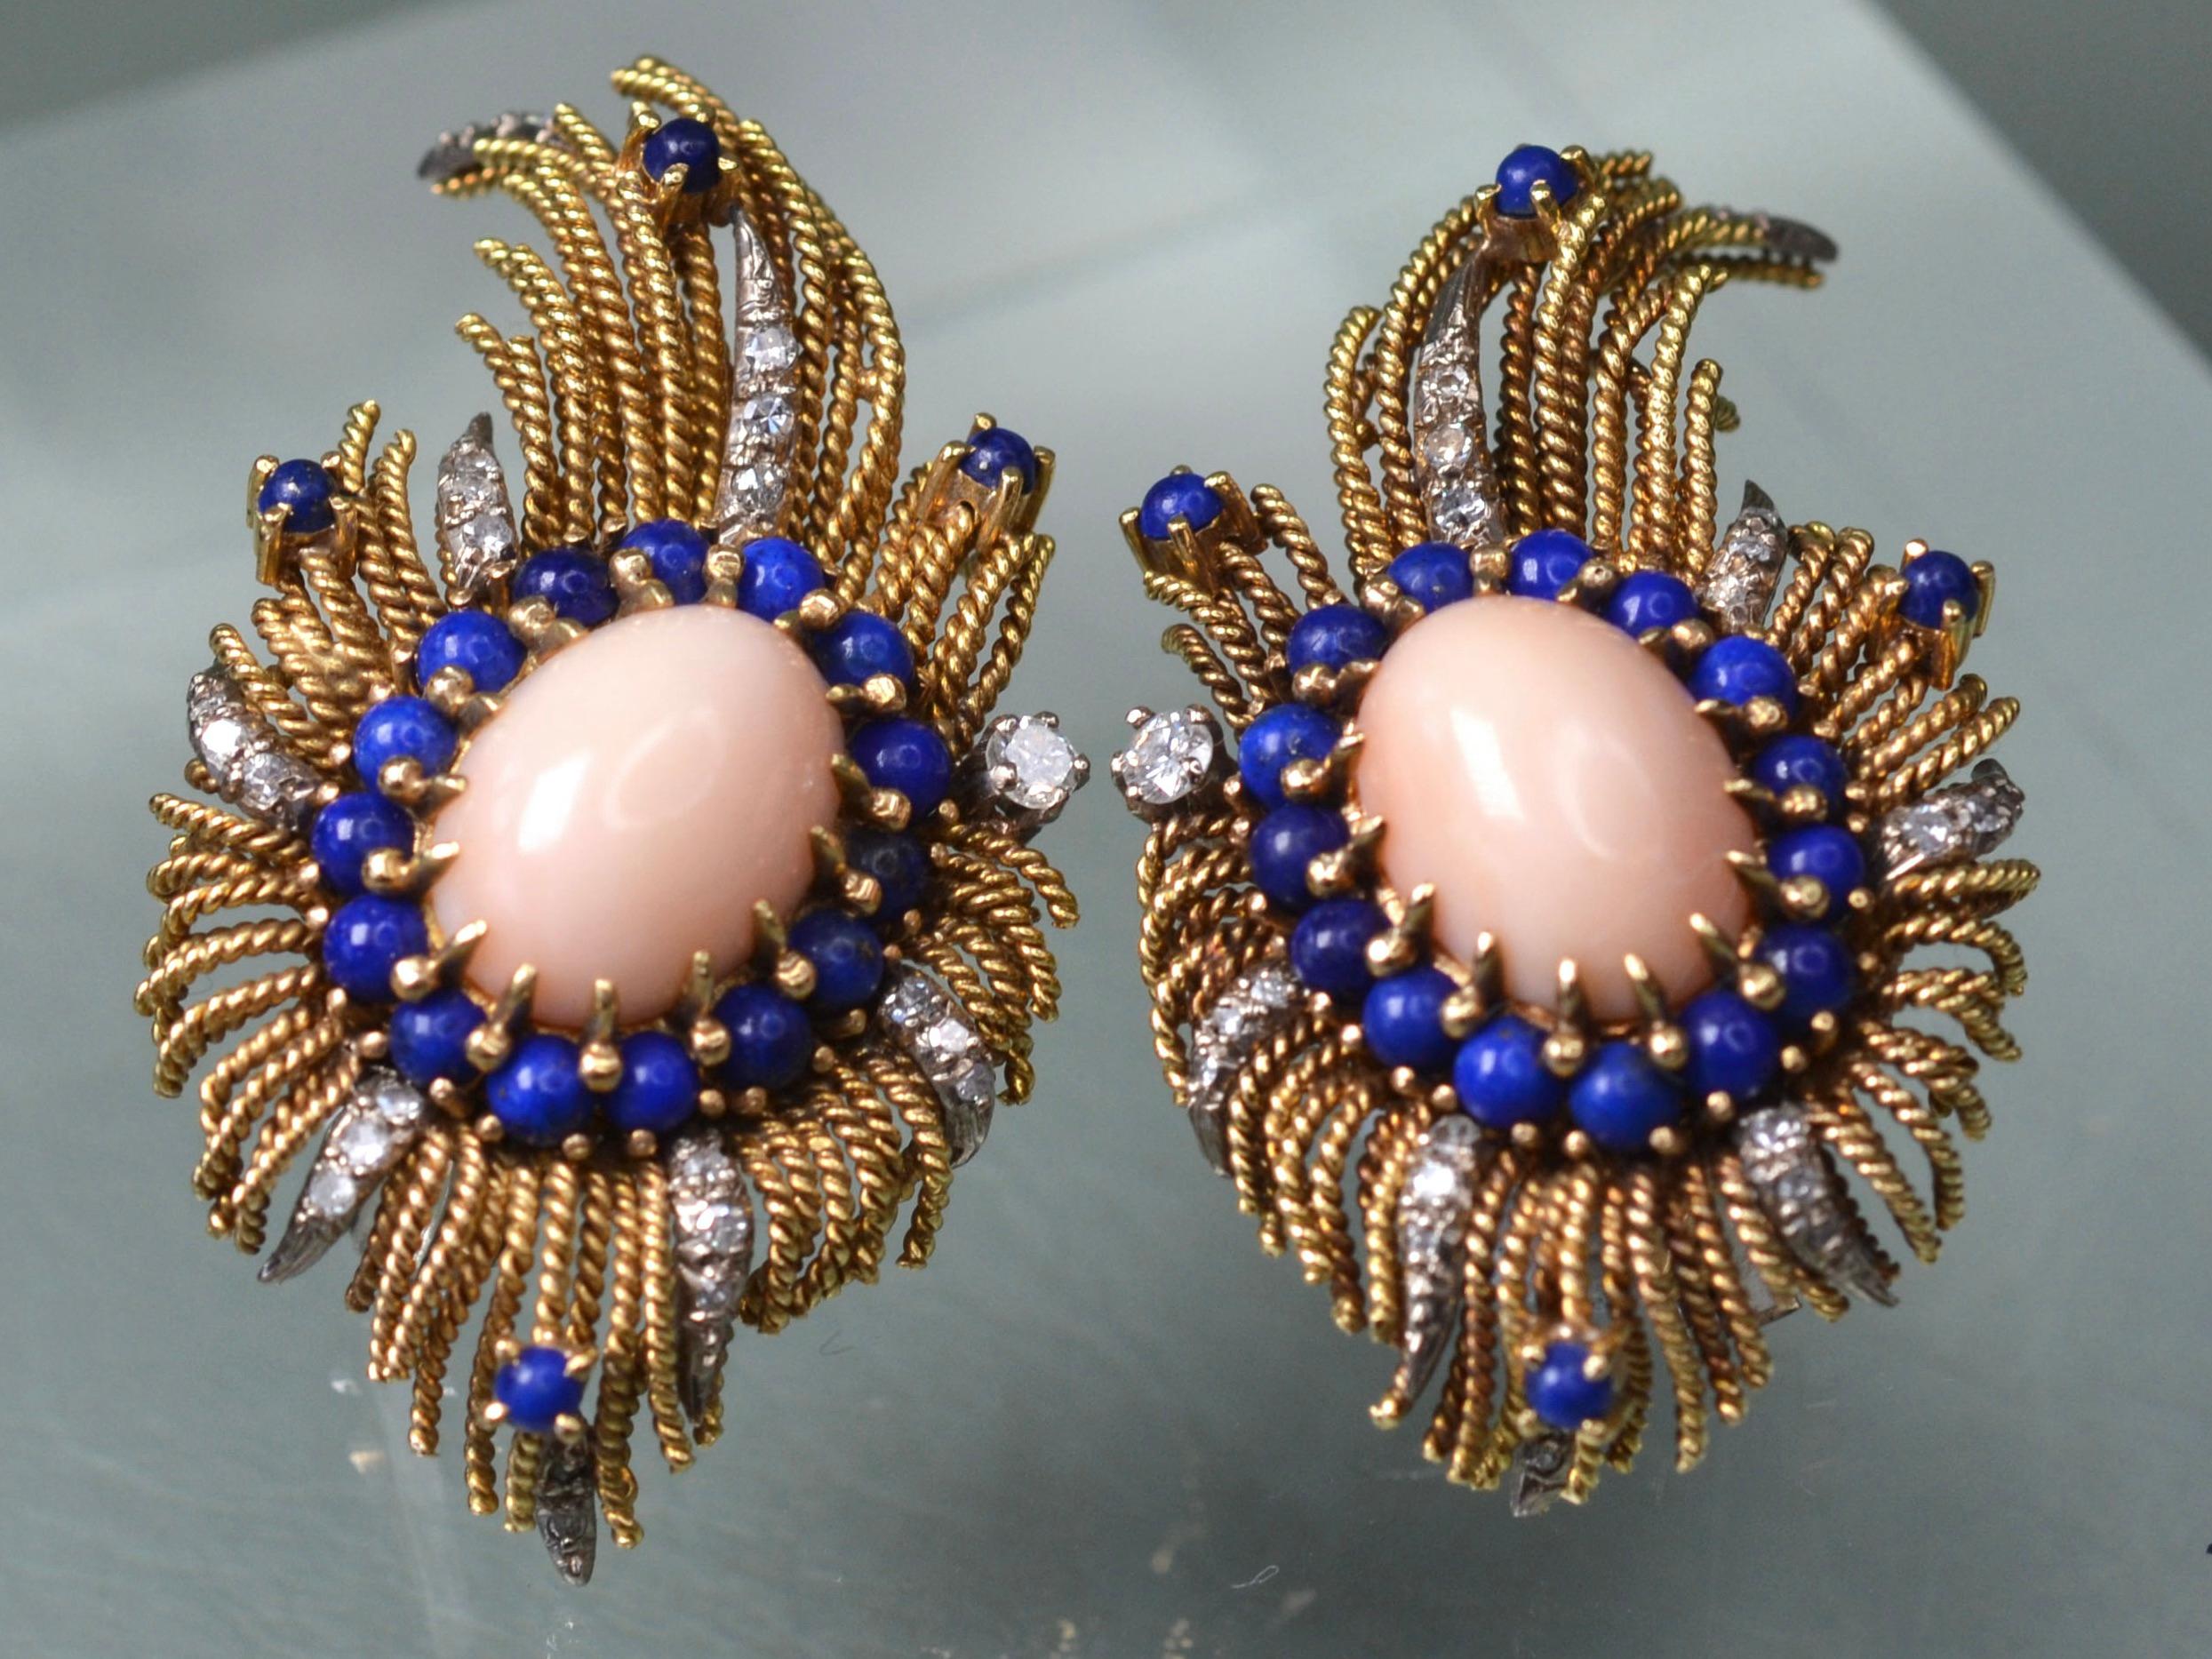 18 Karat Yellow Gold, large statement clip-on earrings from the 1970s.
Each earring features a central, pale pink 10mm x 15mm Coral stone, claw set in 18K Gold. Immediately surrounding each coral centrepiece are fifteen spherical, deep blue Lapis